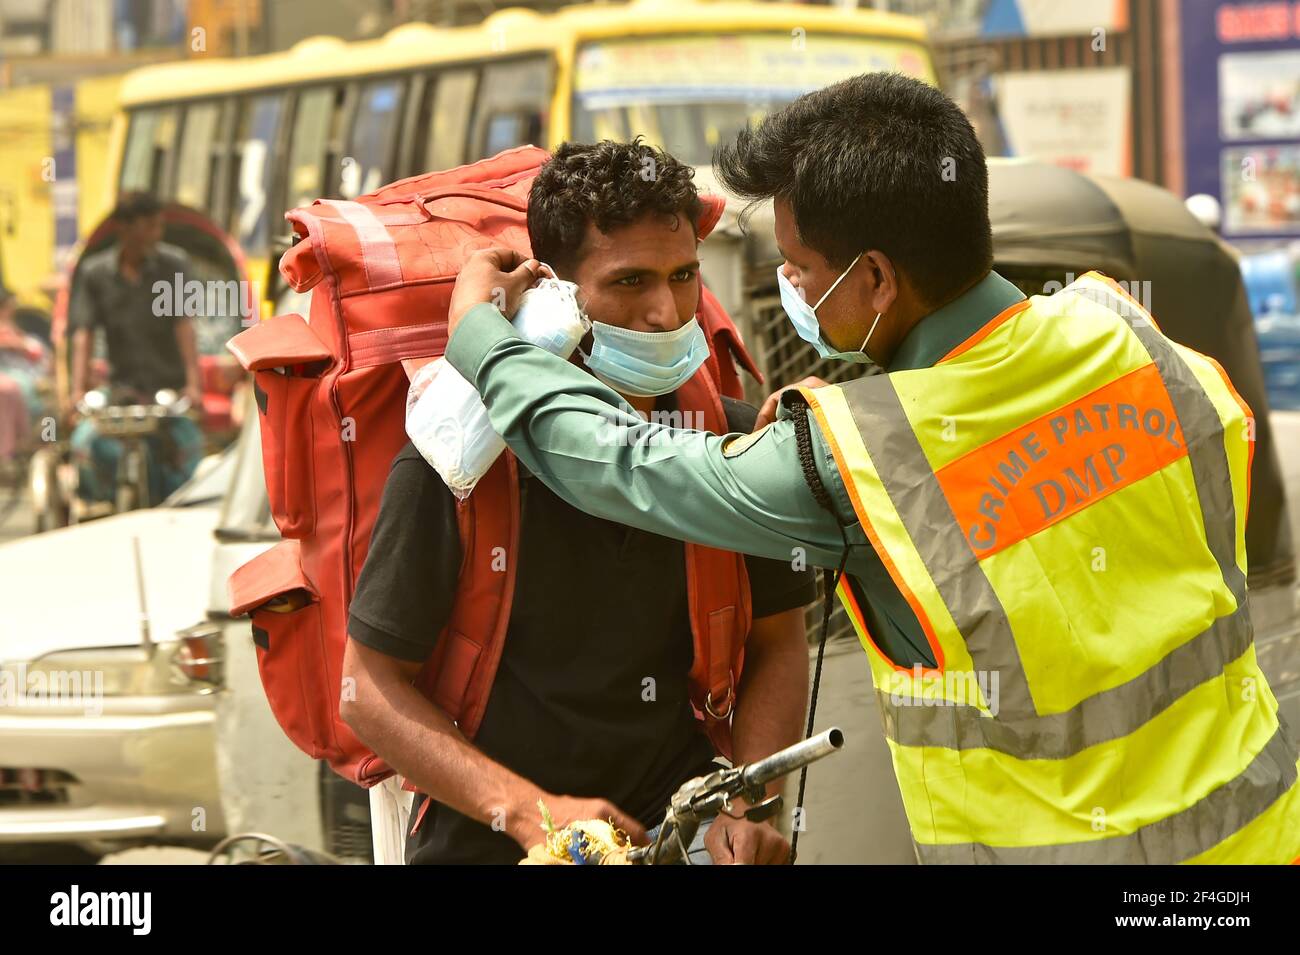 Dhaka. 21st Mar, 2021. A policeman gives a mask to a rickshaw puller on a street in Dhaka, Bangladesh, March 21, 2021. Bangladesh government is emphasizing on the use of masks to contain the spread of the COVID-19 pandemic. Credit: Xinhua/Alamy Live News Stock Photo